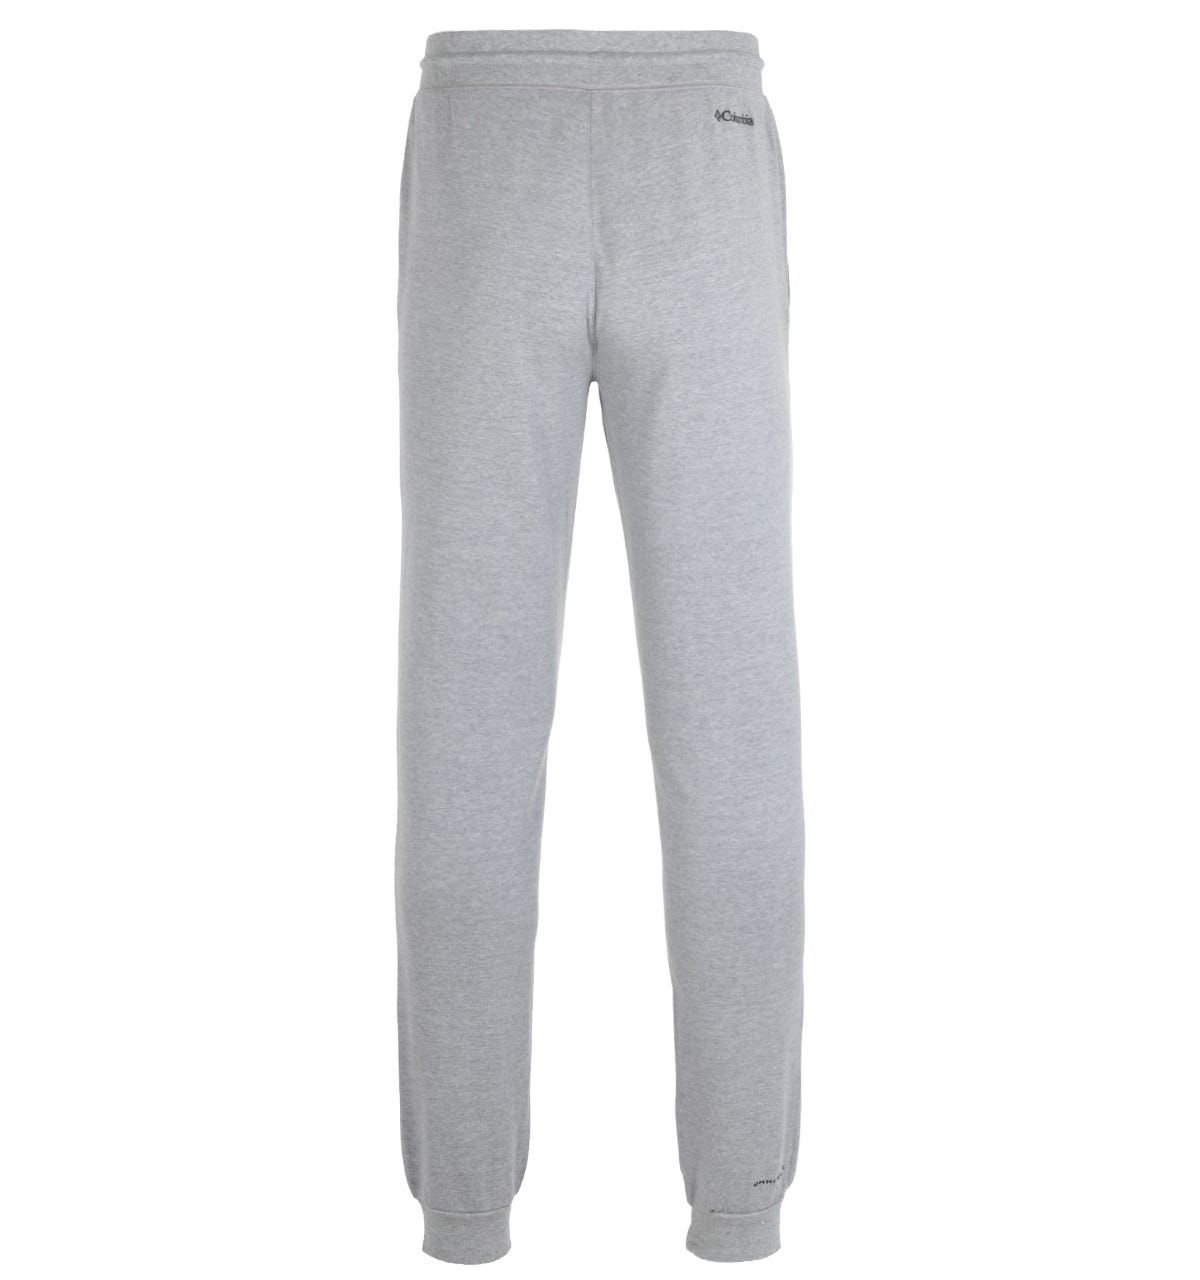 <p>This is the Lodge double knit Joggers in Charcoal Heather by Columbia. Columbia Sportswear is a global outdoor brand based in Portland. They specialise in crafting active lifestyle gear with industry leading technologies. Columbia\'s apparel, footwear, and accessories reflect their Pacific Northwest heritage and indomitable spirit.</p><ul><li>Omni-Shade™ UPF 50 sun protection</li><li>Elastic at waist</li><li>Drawcord adjustable waist</li><li>Hand pockets</li></ul><p>Style & Fit</p><ul><li>Active Fit: Body skimming fit with end-use mobility in mind</li></ul><p>Composition & Care</p><ul><li>Shell: 50% Cotton 50% Polyester</li><li>Rib: 97% Cotton 3% Elastane</li><li>Lining: 100% Polyester</li><li>Machine Wash</li></ul>